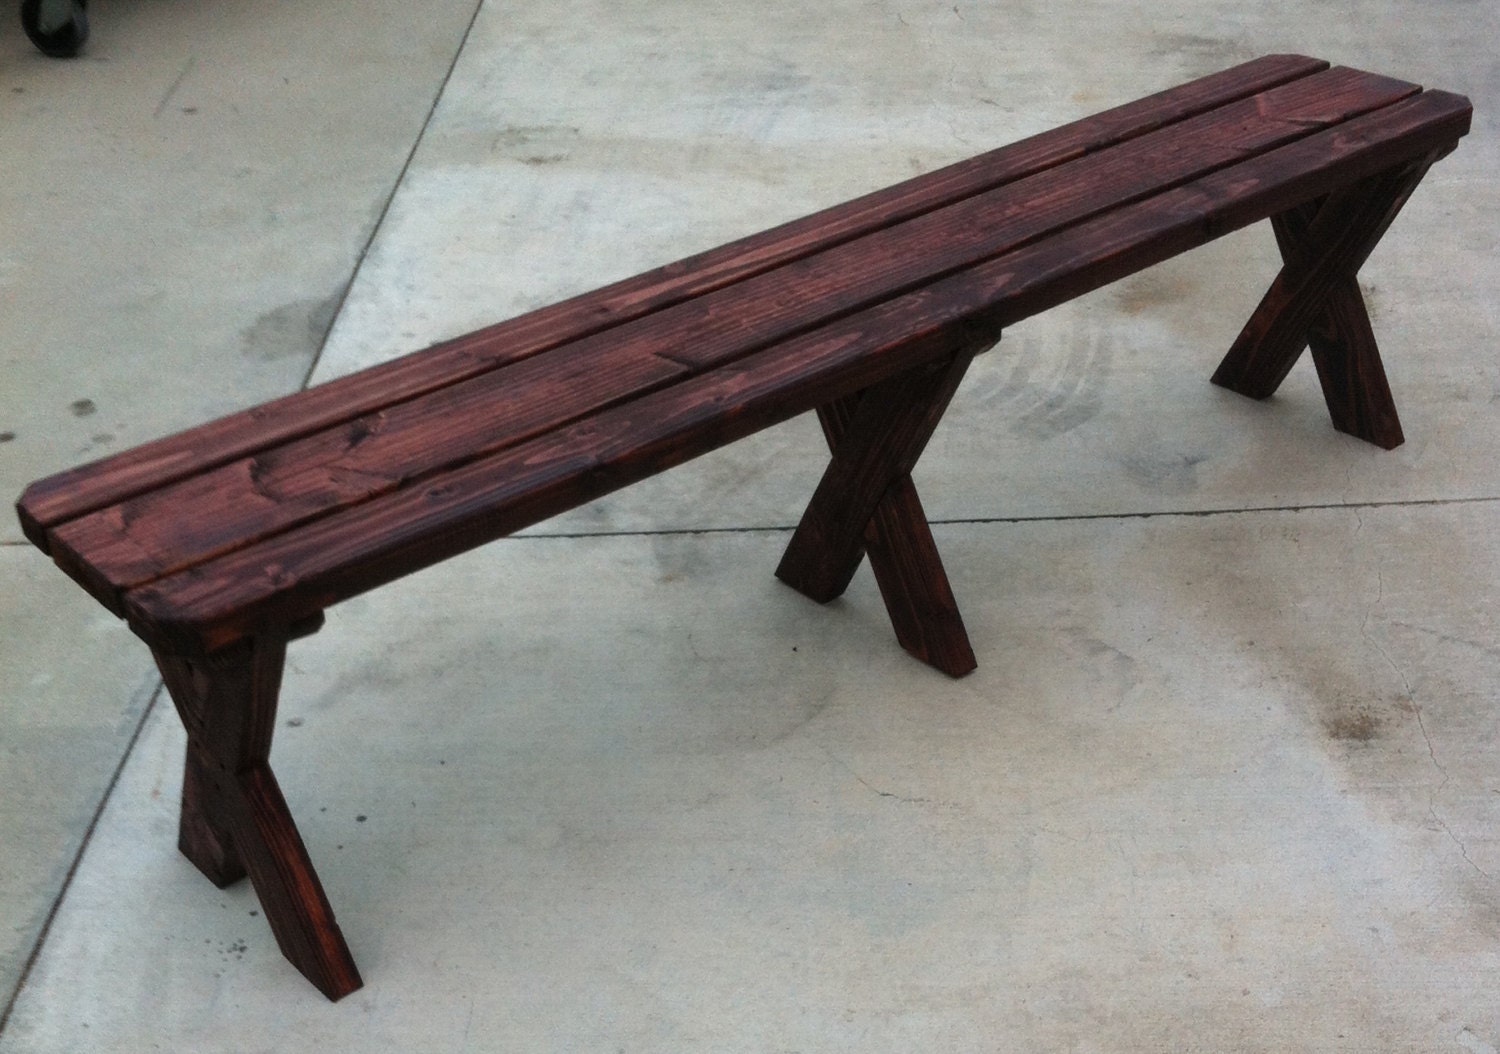 Picnic Bench. 6 ft x 1 ft. 18 inches high. | Etsy